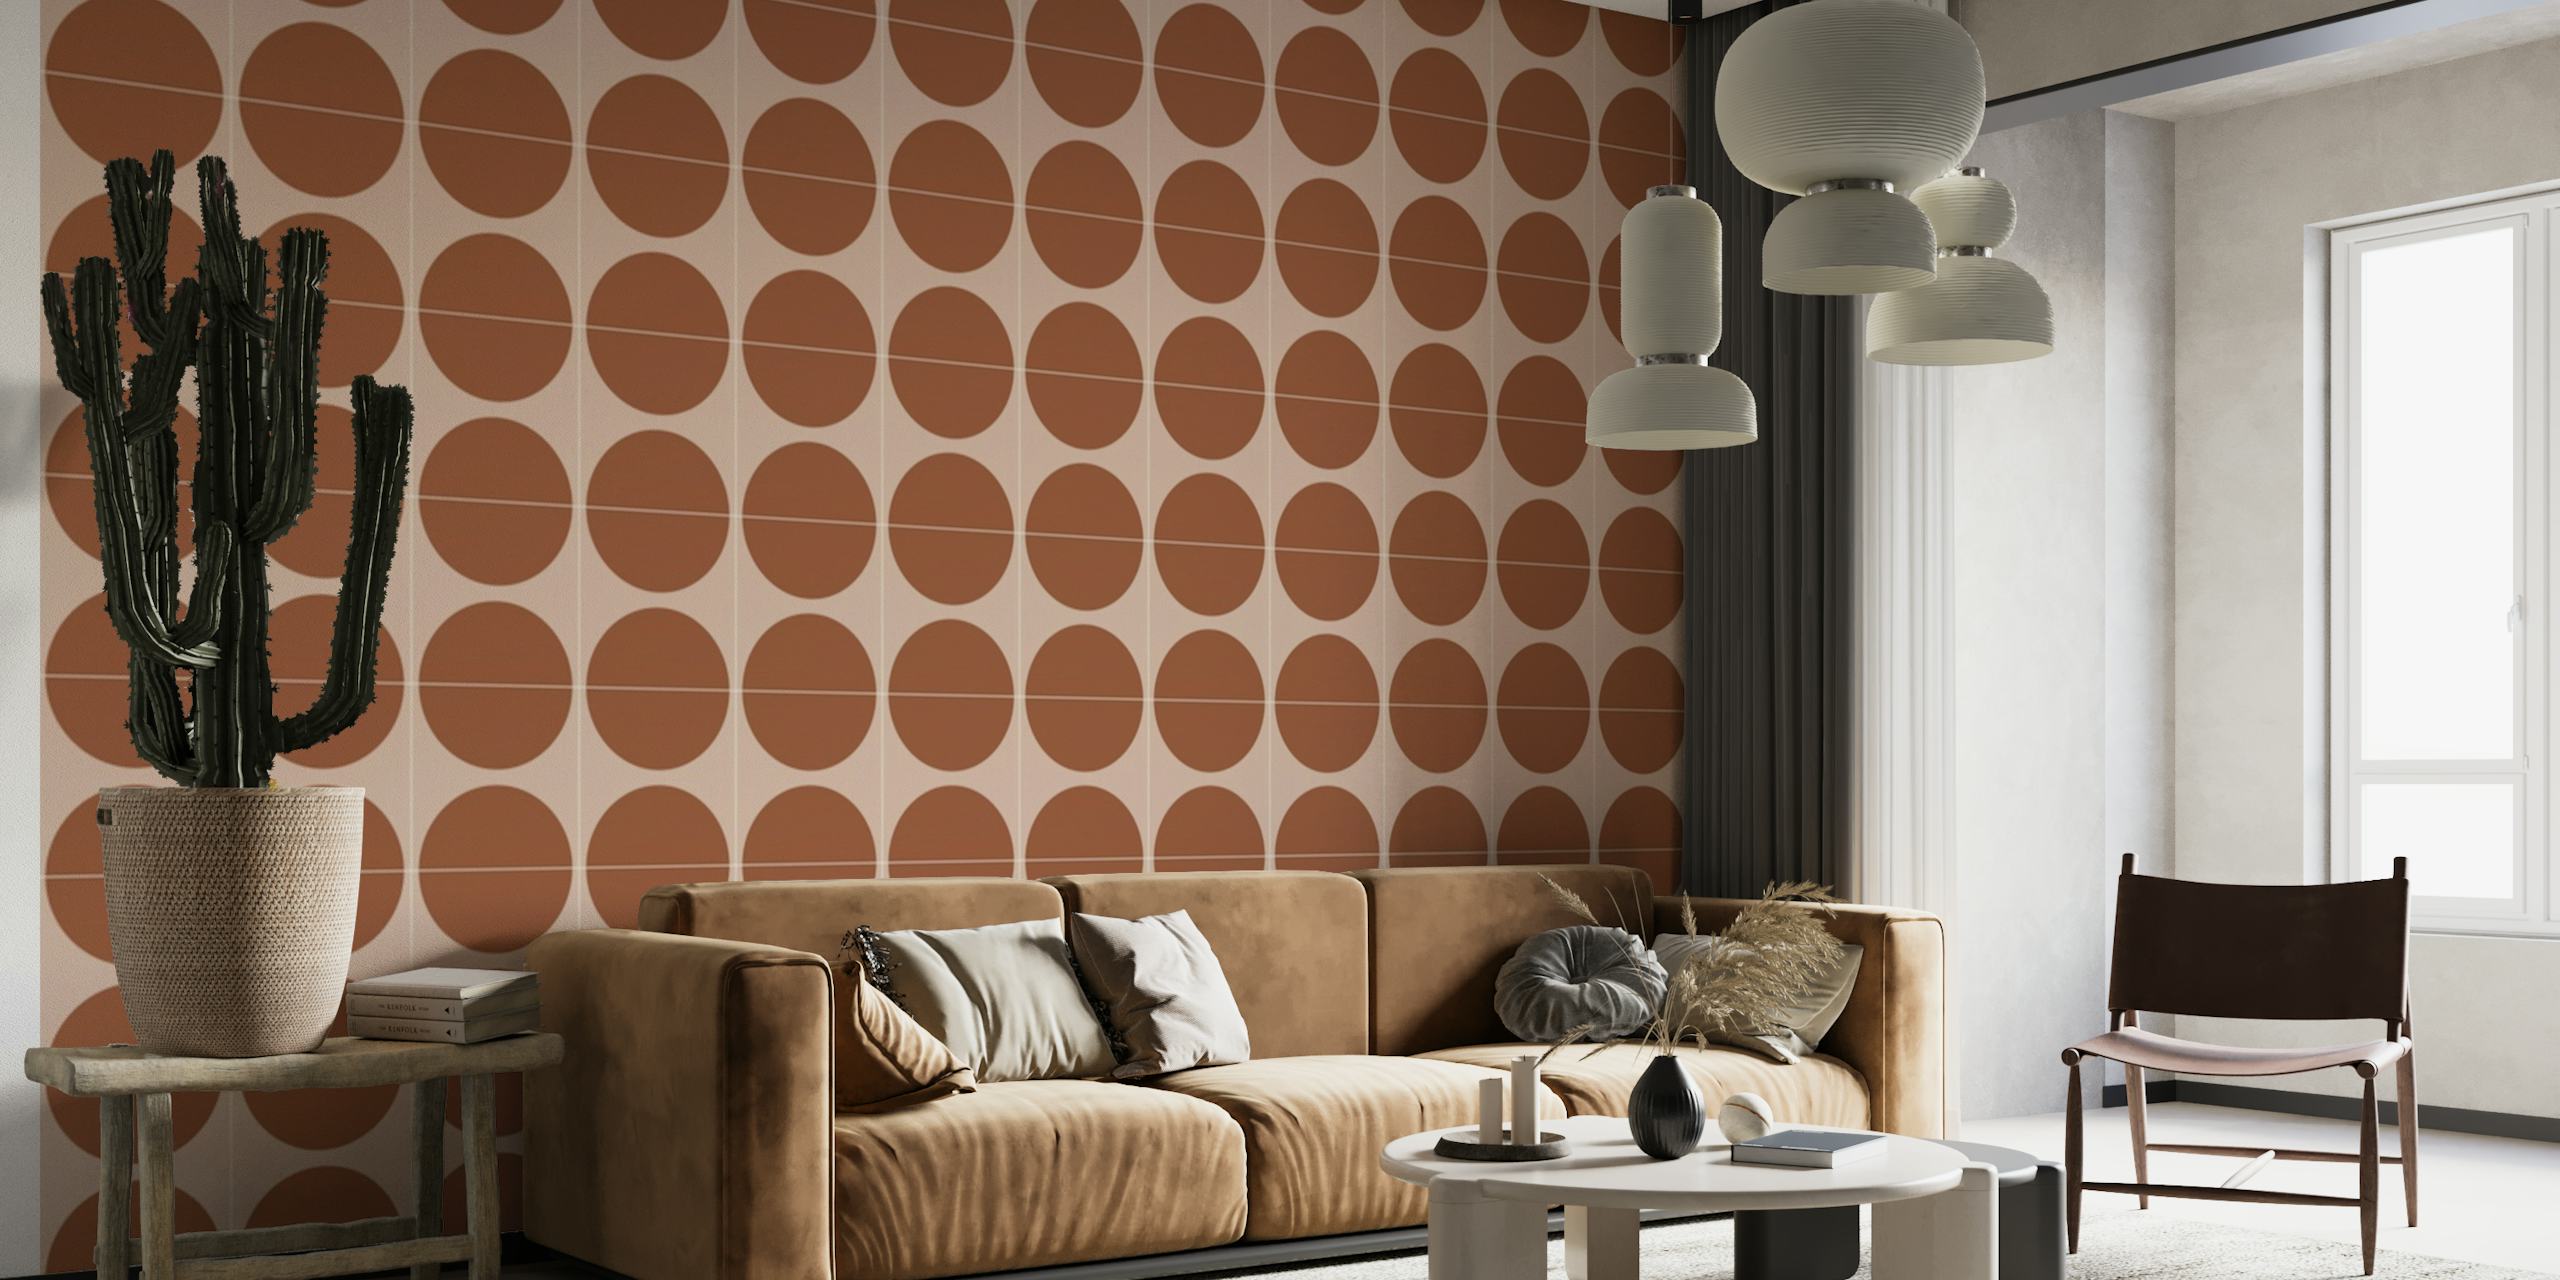 Painted Cotto Tiles Cinnamon ταπετσαρία